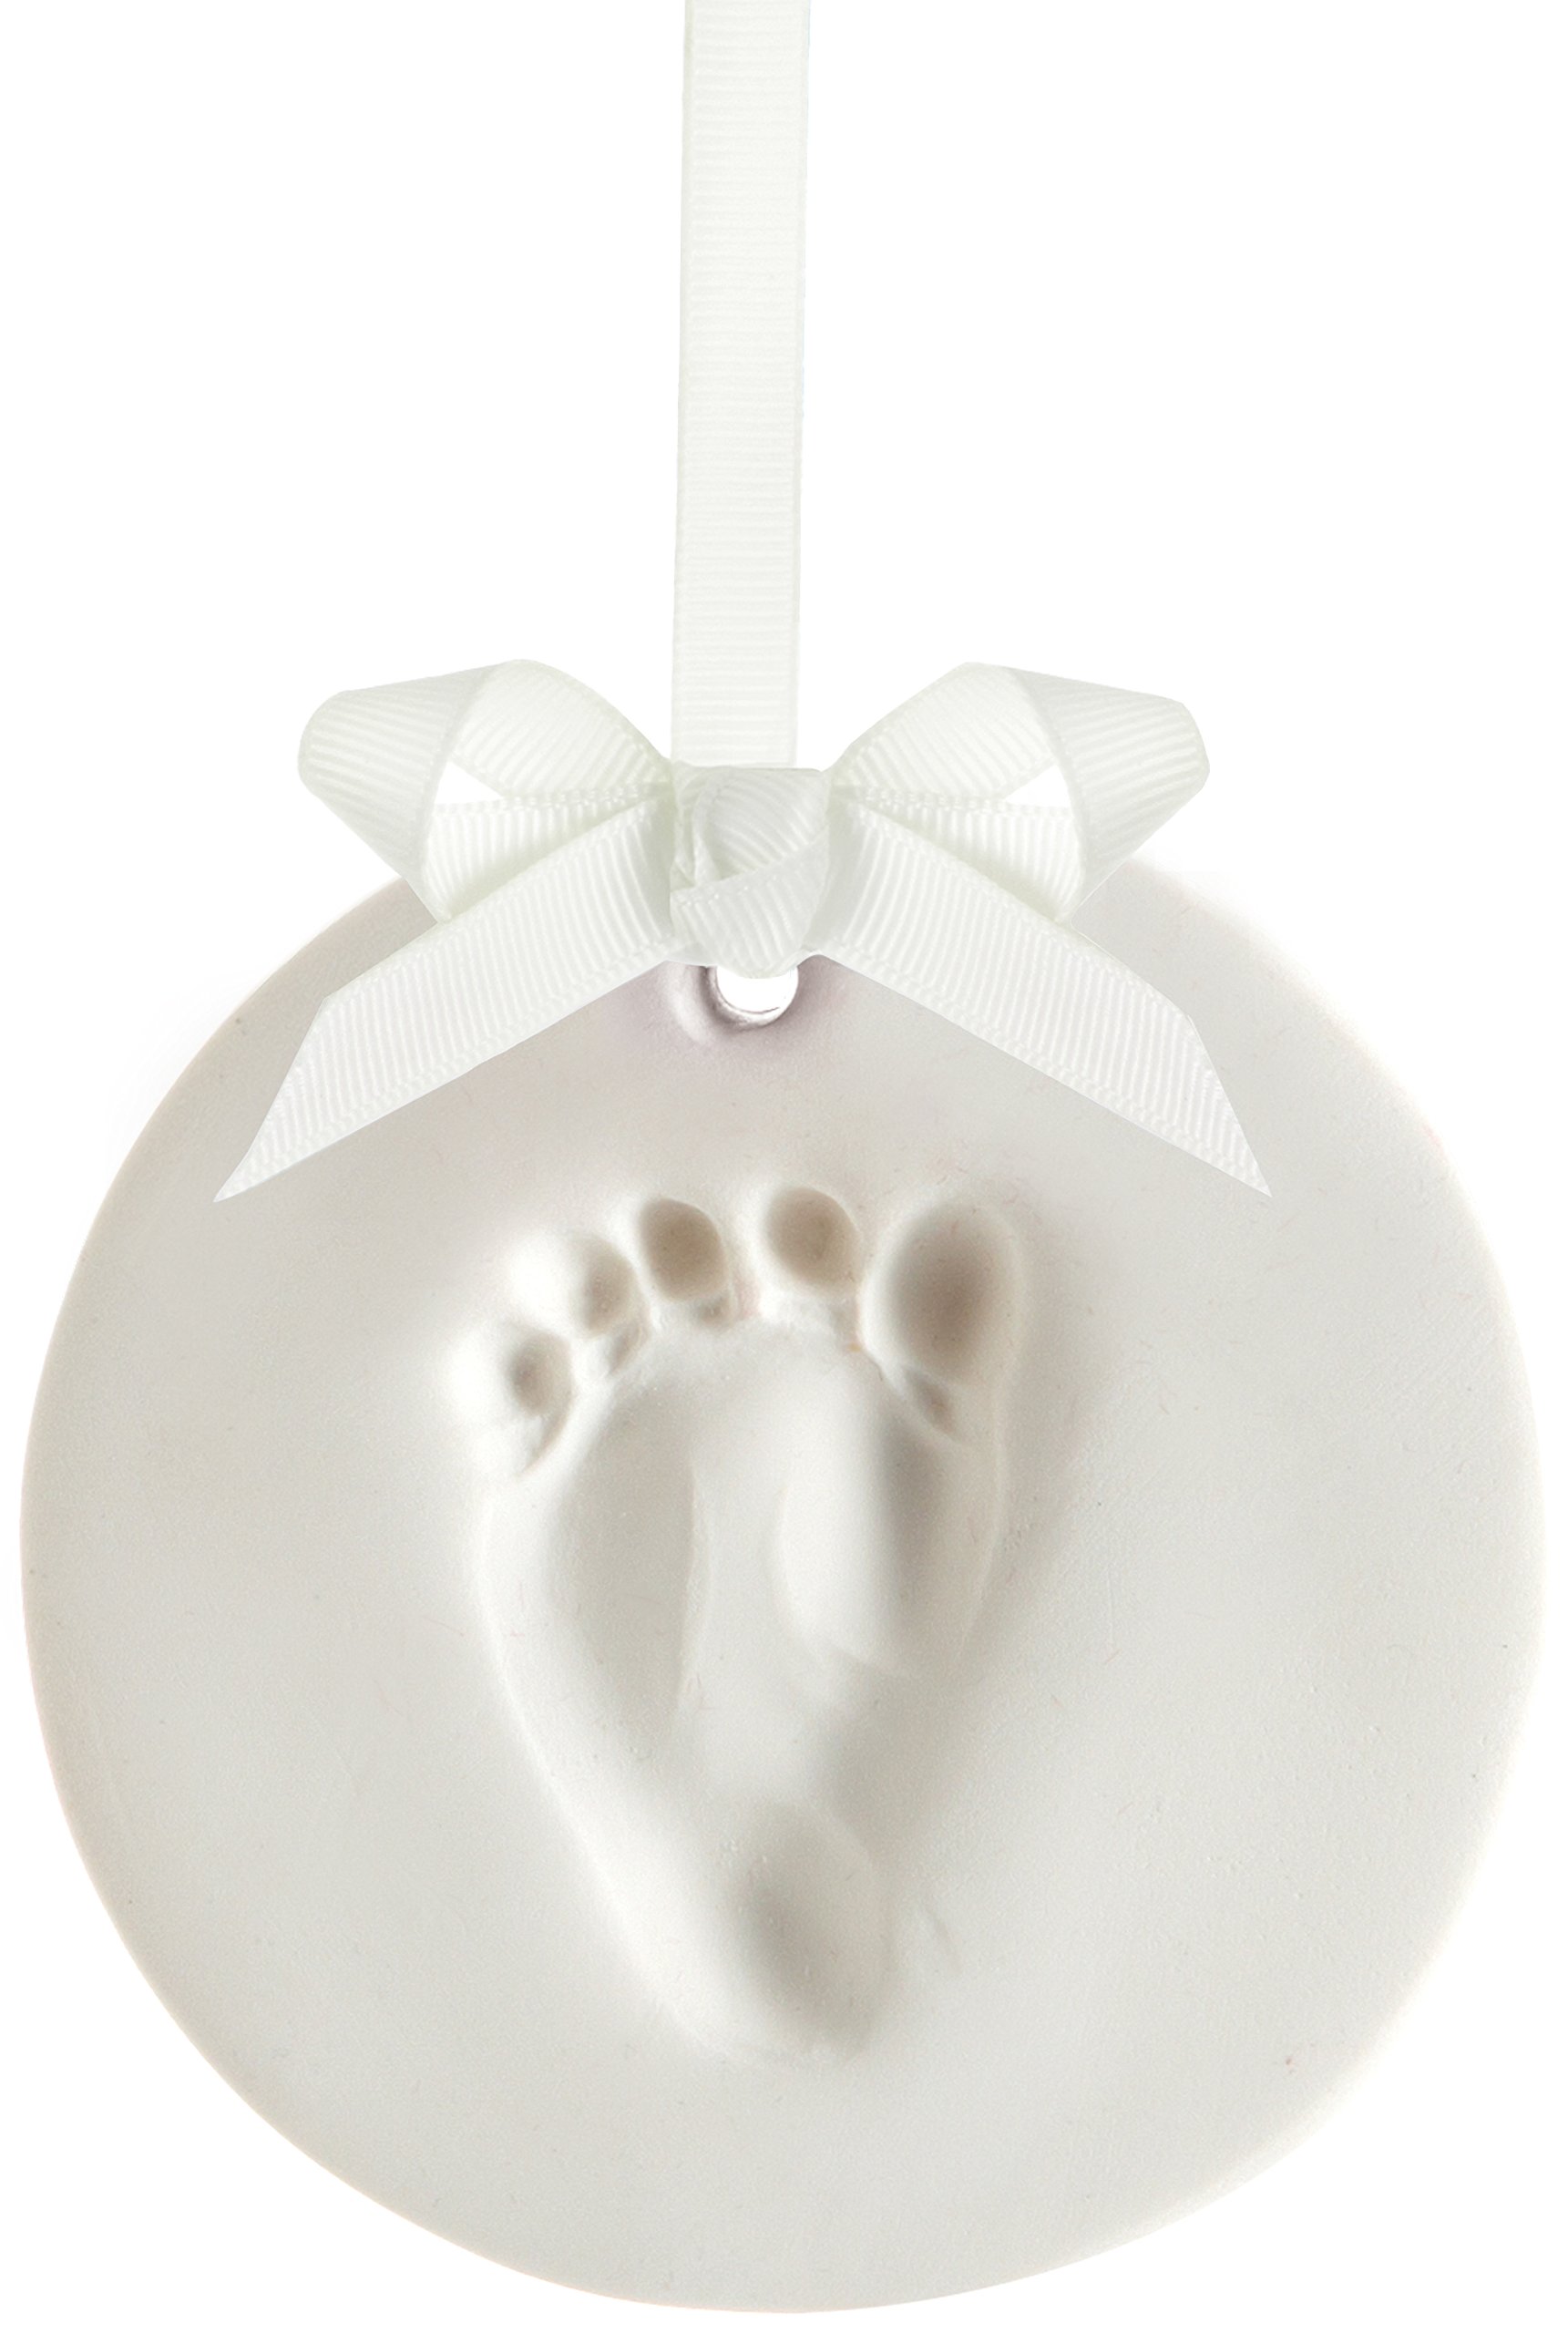 Pearhead Babyprints Handprint or Footprint Keepsake, Baby Christmas Ornament, DIY Clay Ornament Kit, Baby's First Christmas, Newborn Holiday Keepsake Ornament, Gift For New And Expecting Parents